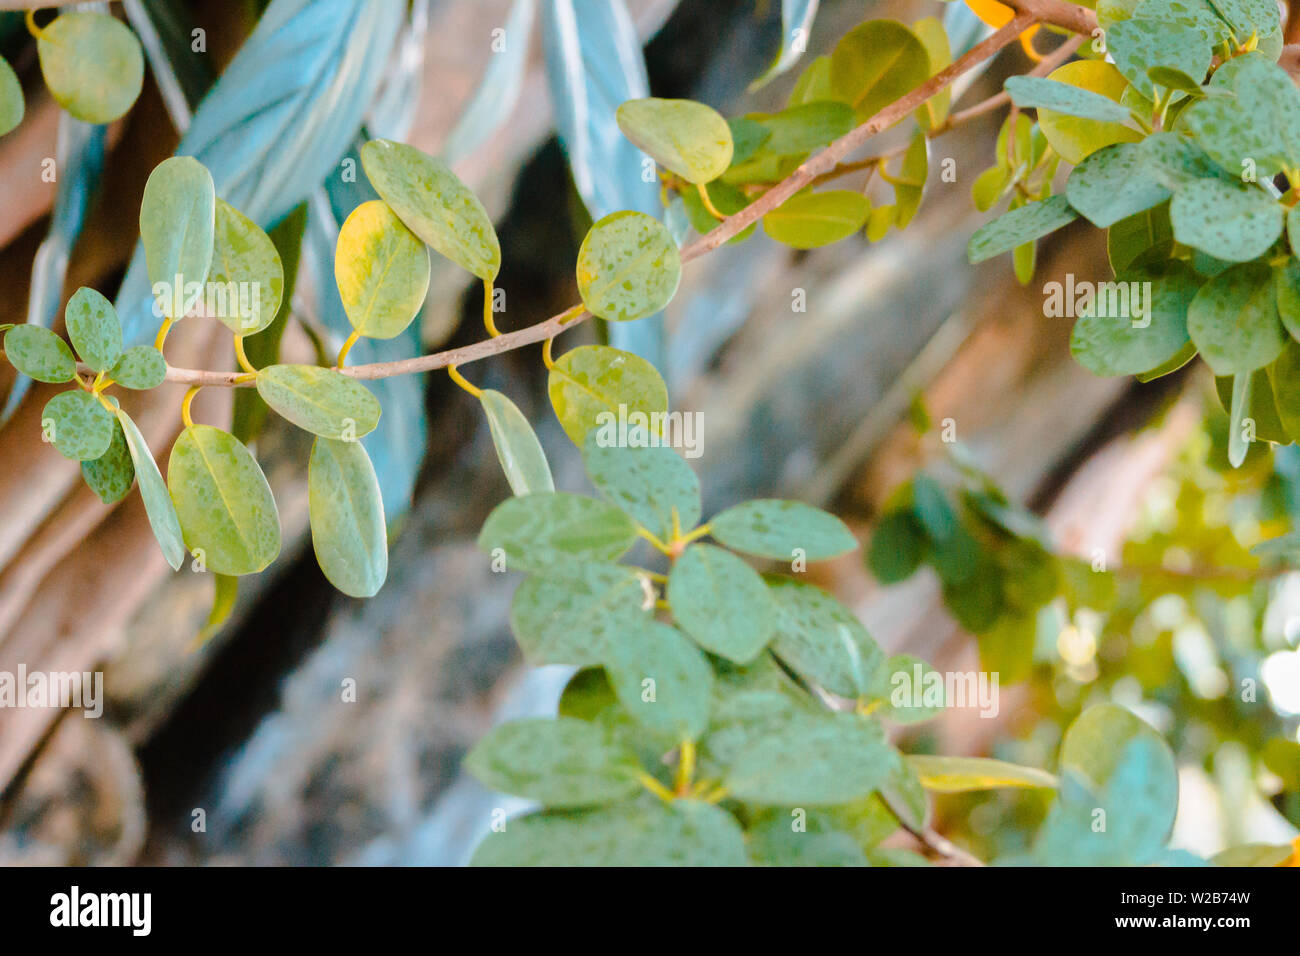 leafy branches from plants in the tropical gardens Stock Photo